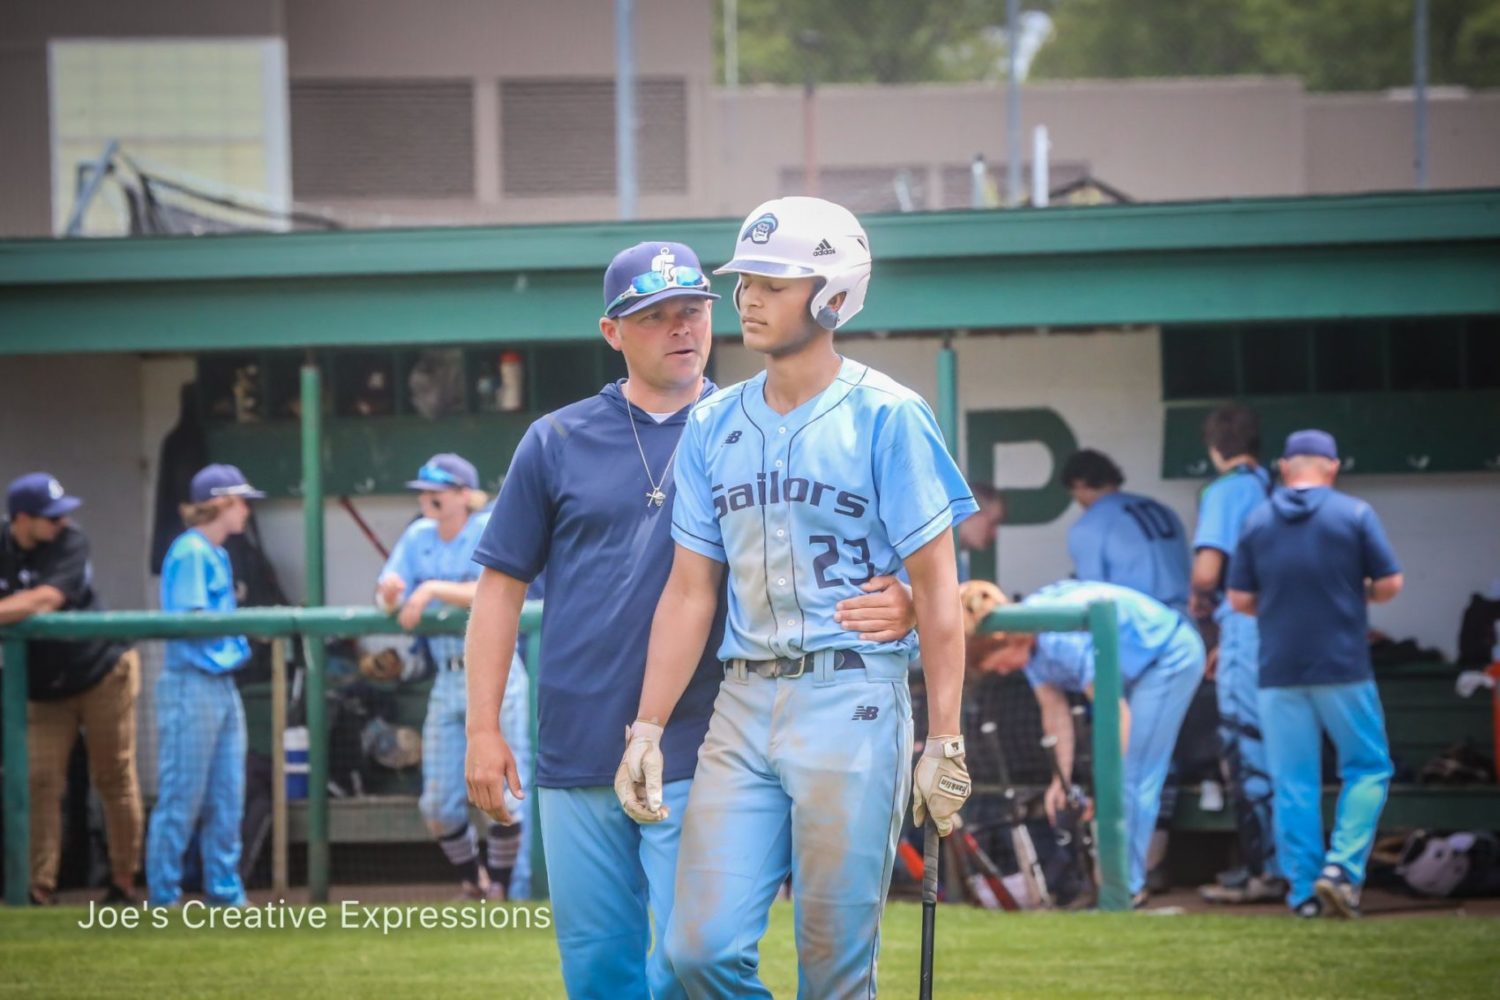 Mona Shores falls to Reeths-Puffer 5-3 in district semi-final baseball action